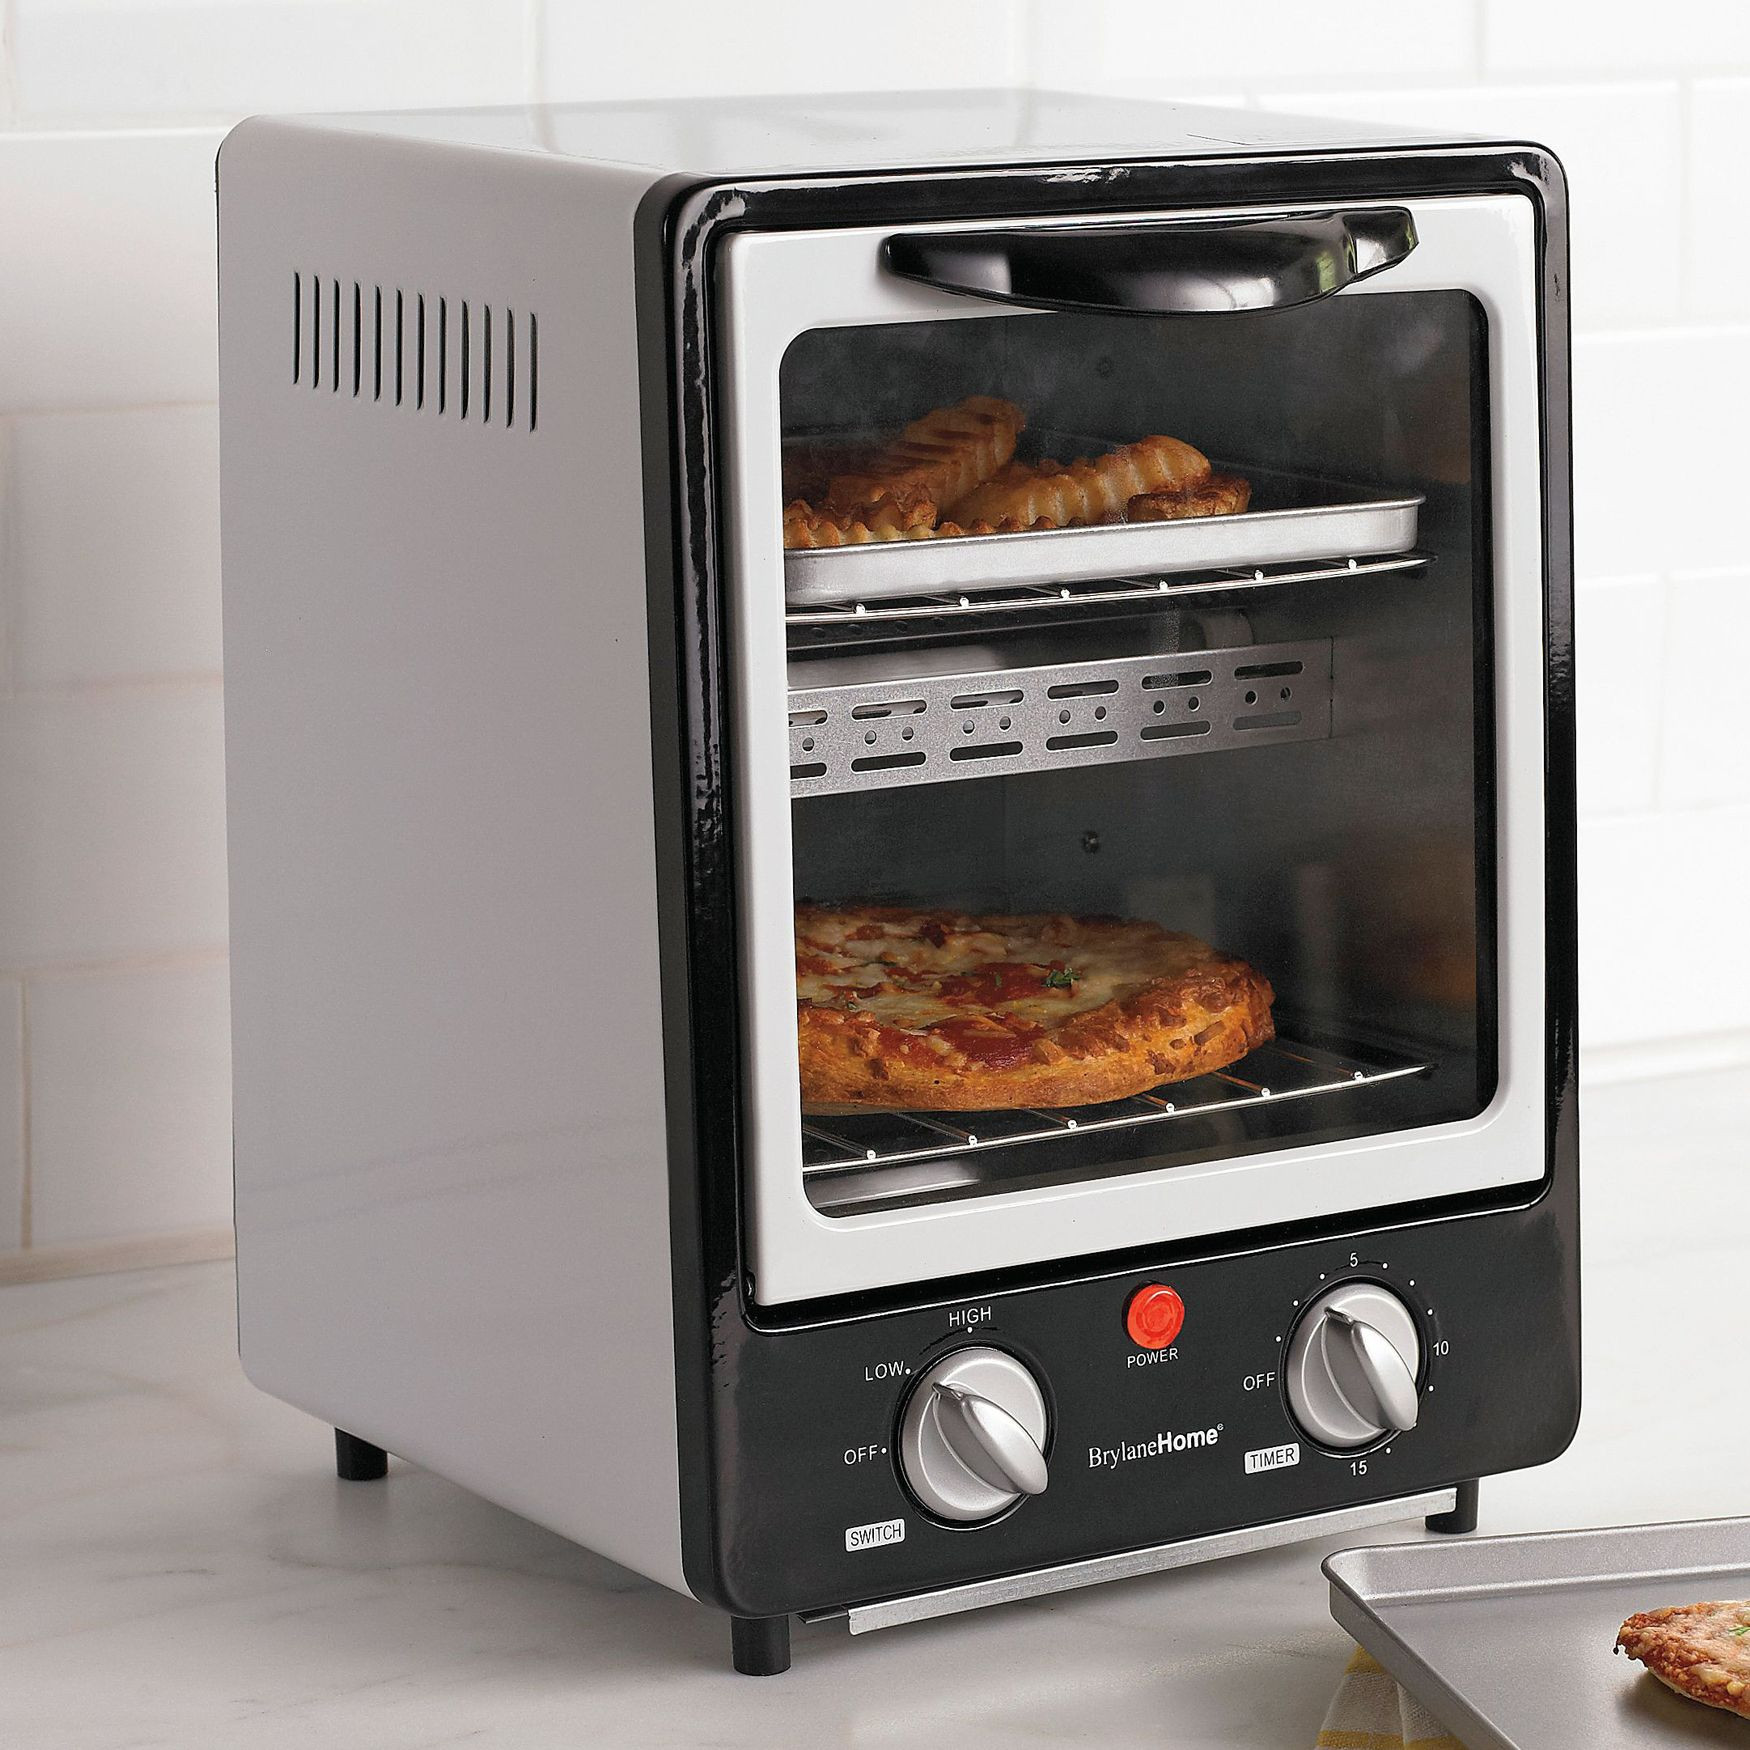 Appliances For Small Kitchen Spaces
 BrylaneHome Vertical Oven